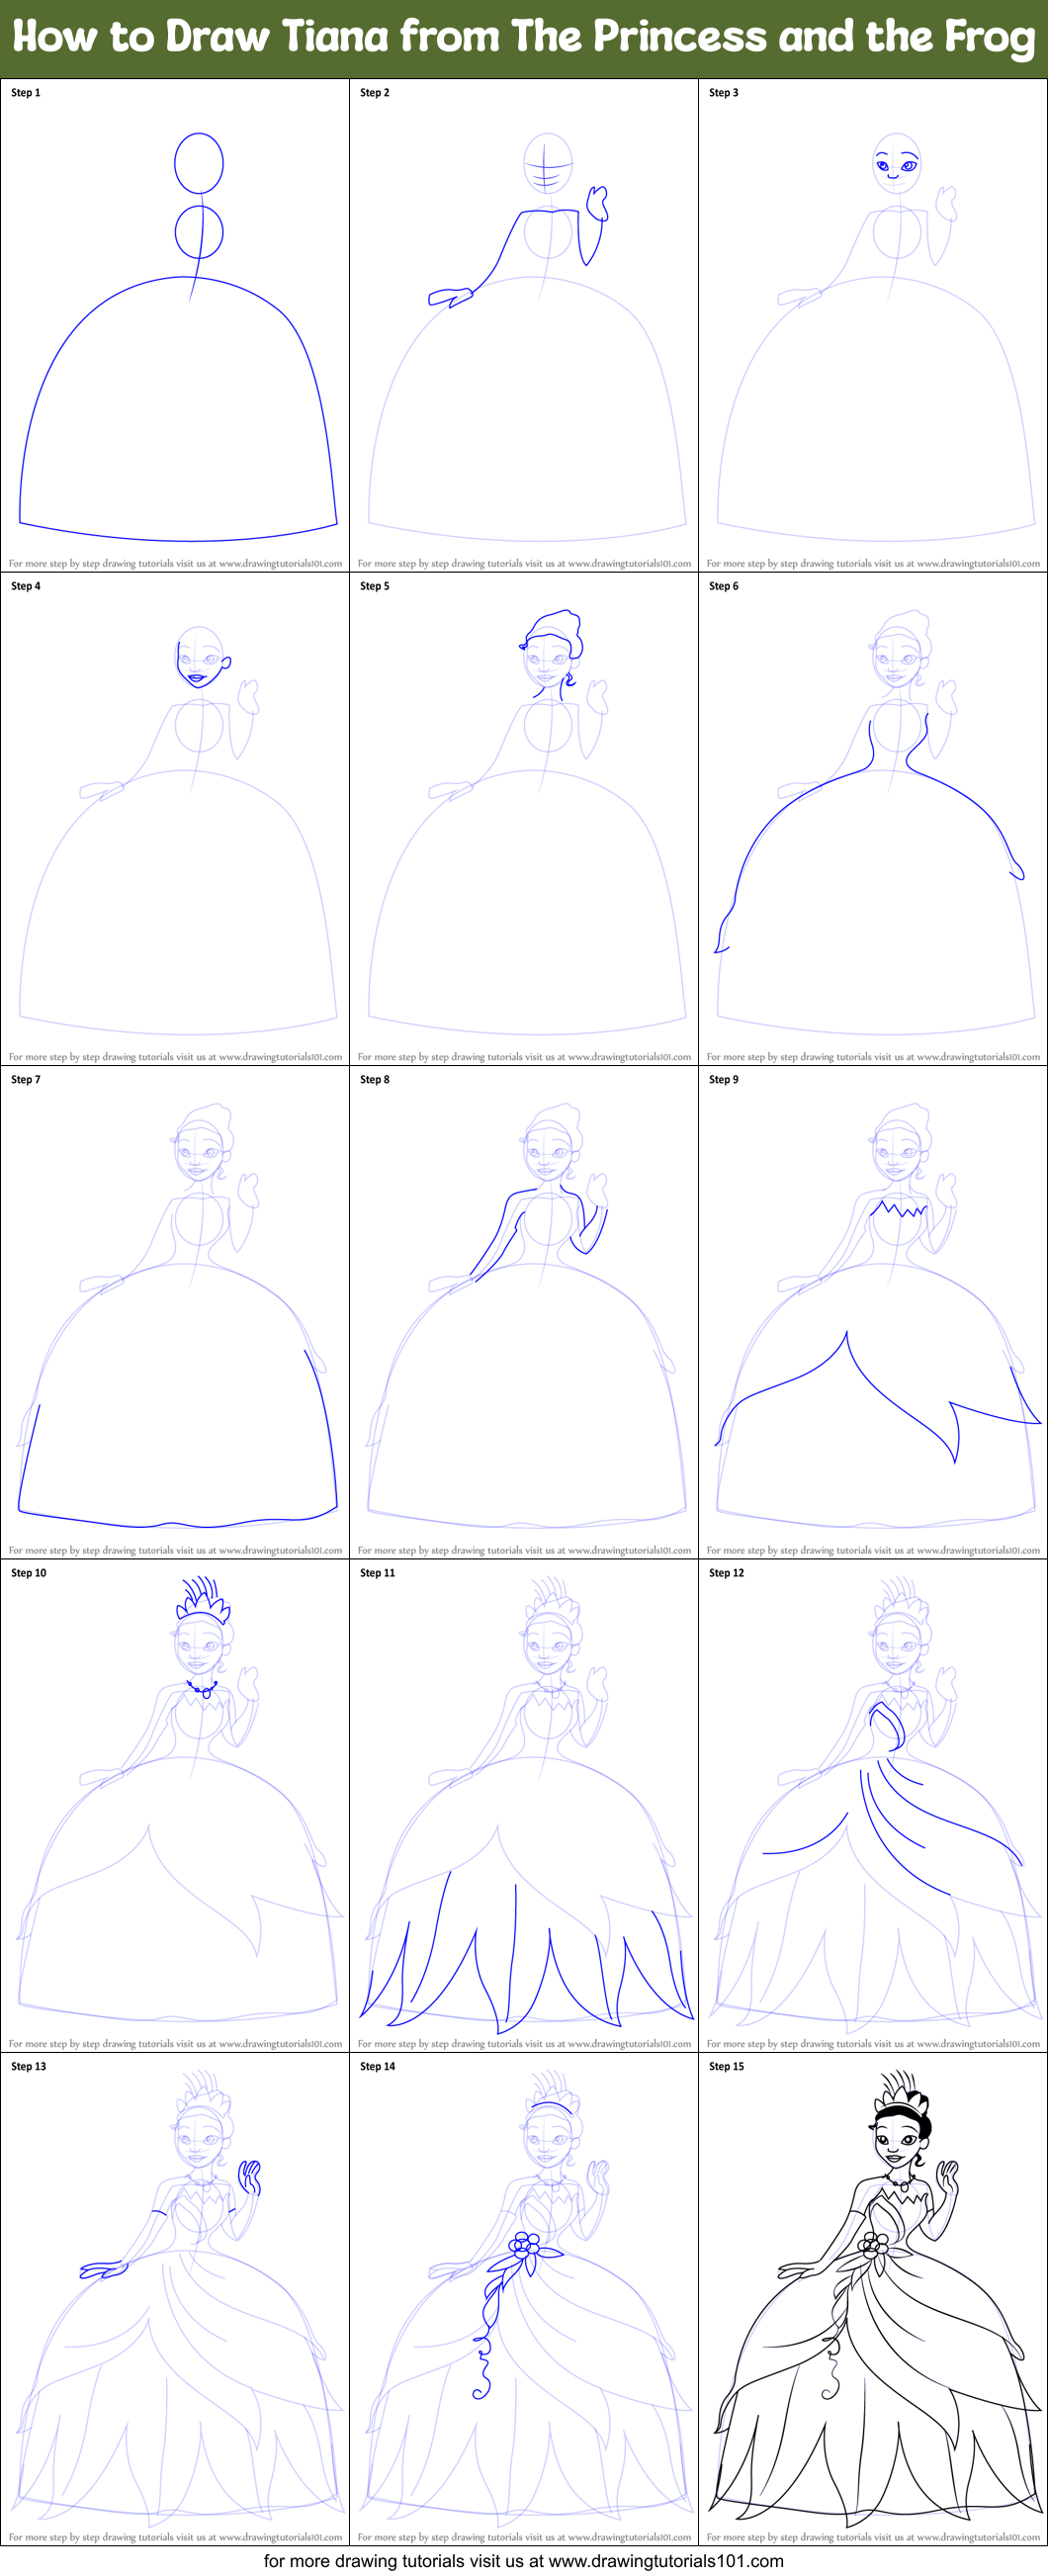 How to Draw Tiana from The Princess and the Frog printable step by step